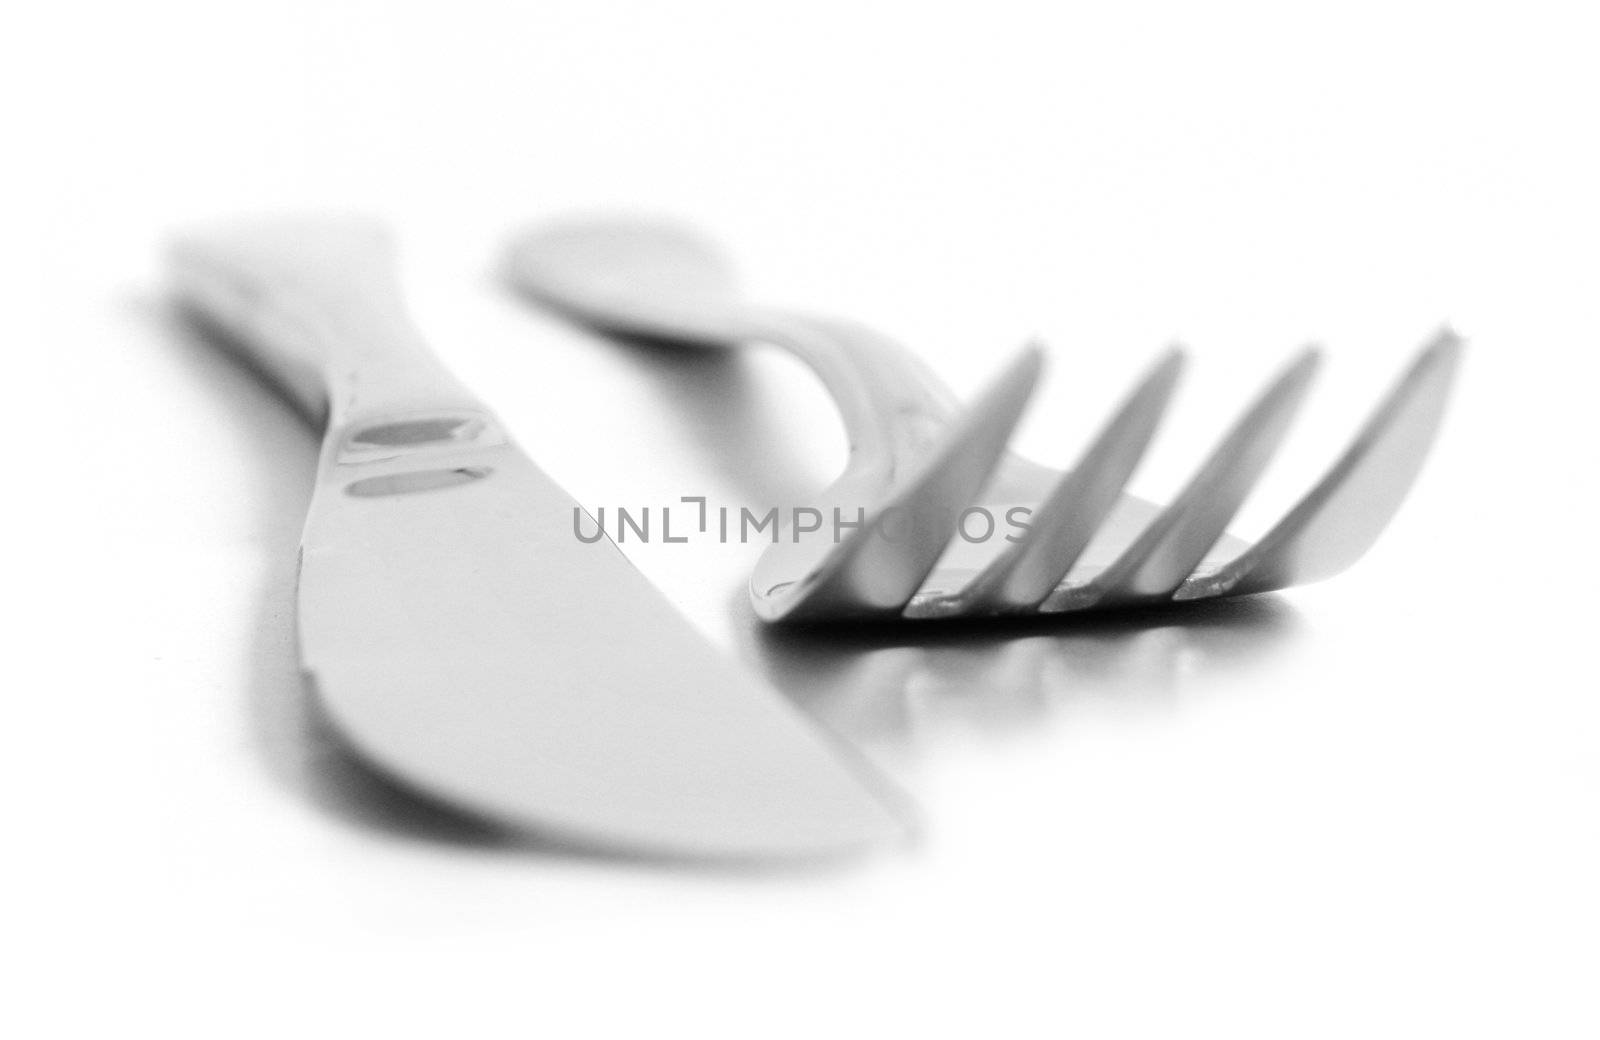 A fork and knife by leeser